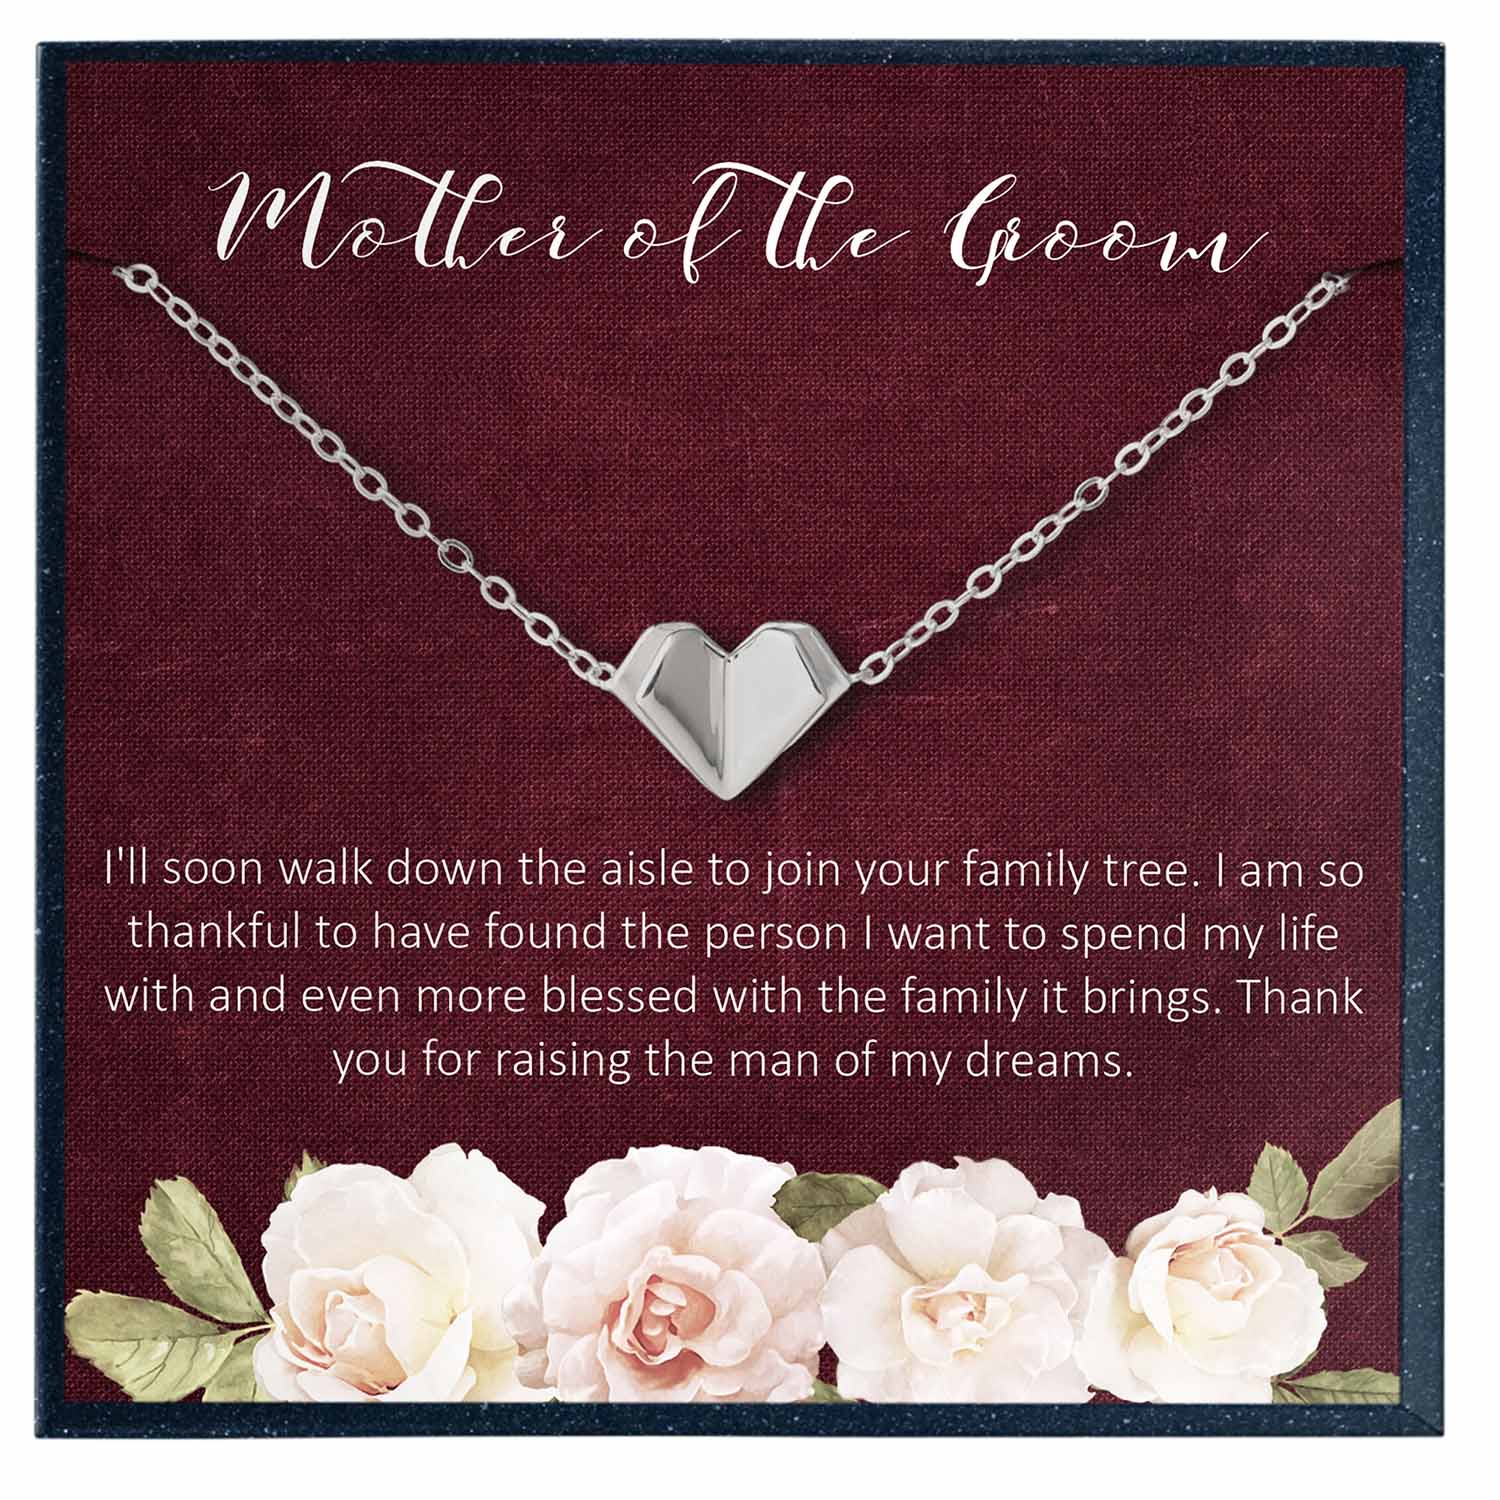 Mother of the Groom Gift from Bride, Future Mother in Law Wedding Gift